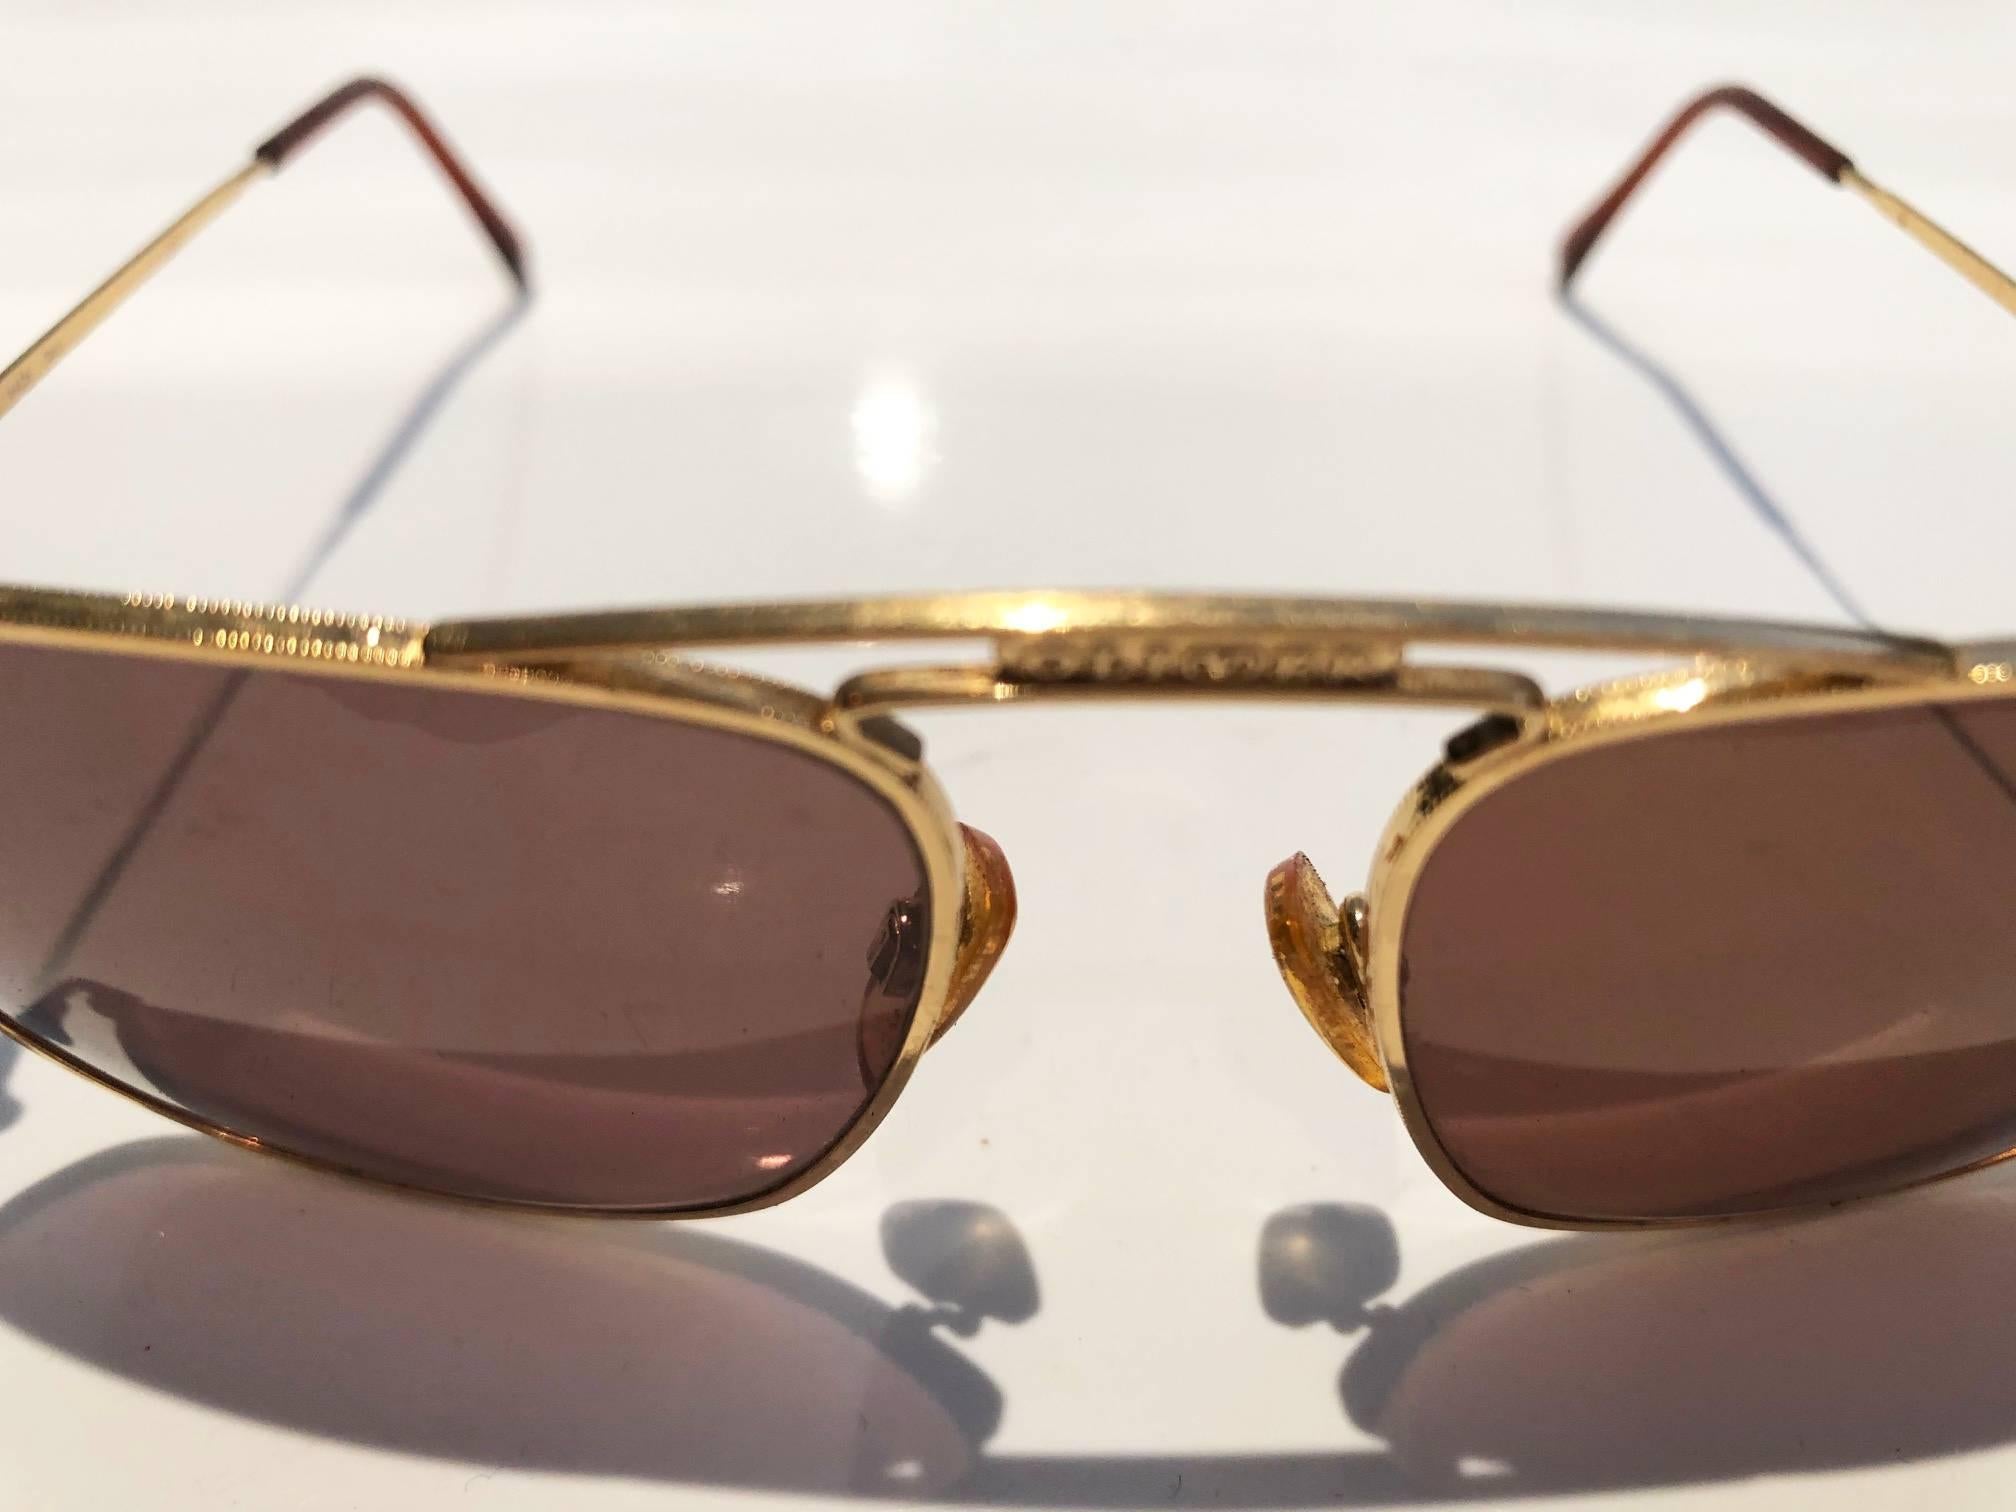 1990s  Valentino by Oliver aviator sunglasses in gold tone frame and dark brown lens
in very good vintage condition, 1990s